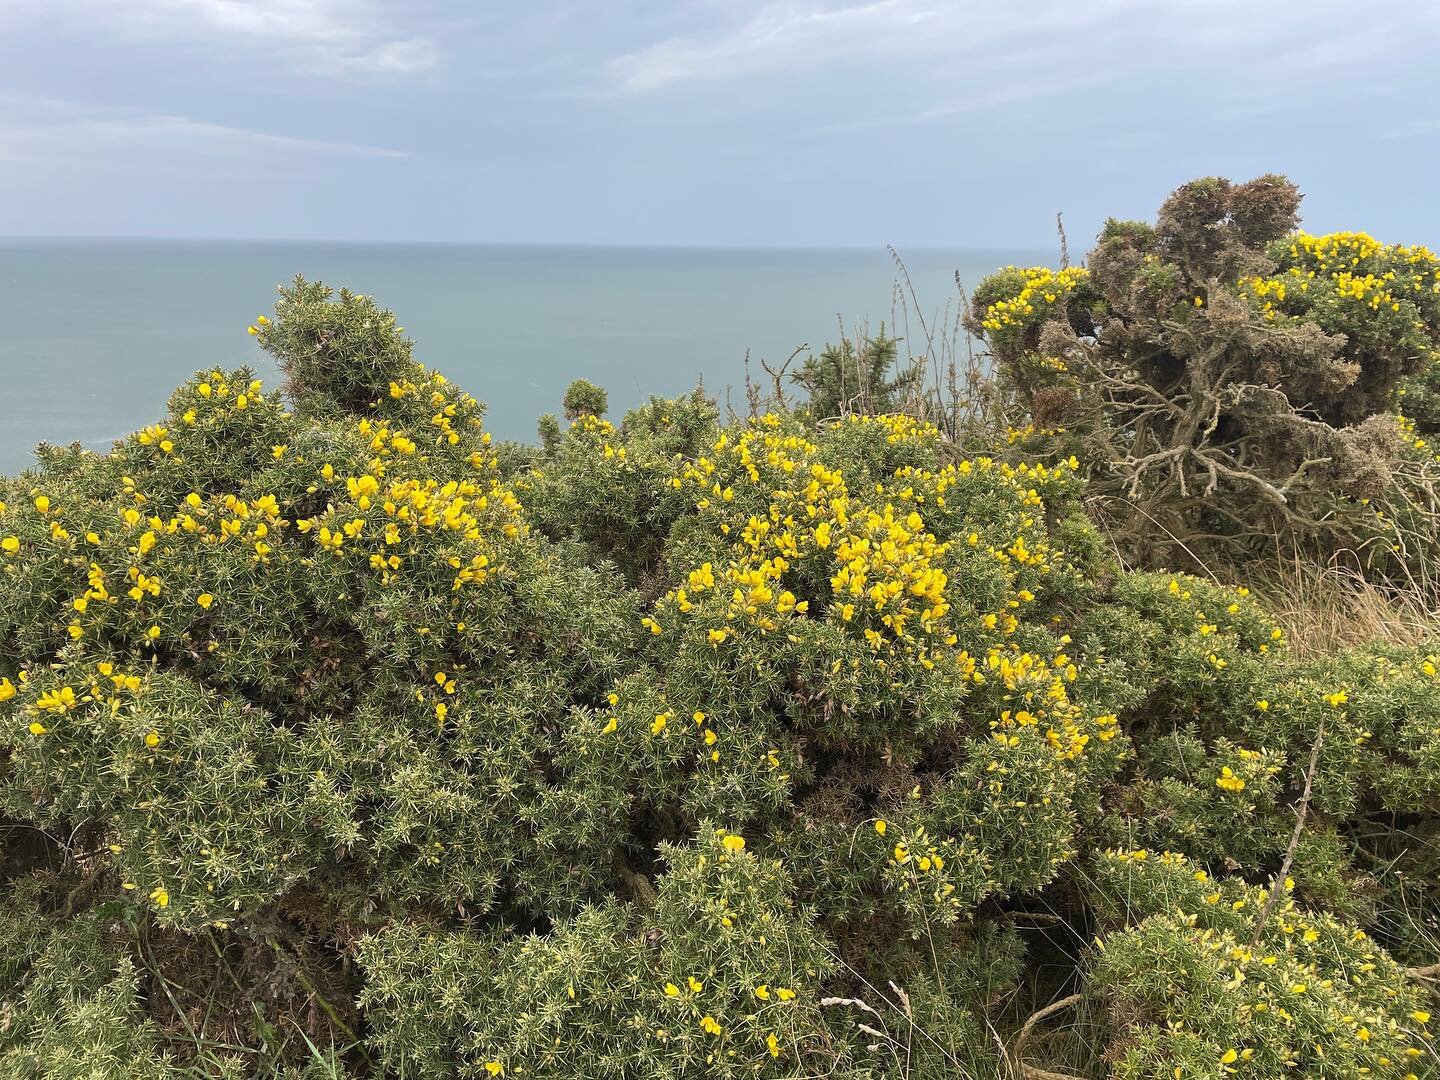 Day 62 on SlowCoast500 from St Abbs to Burnmouth, the gorse shows its soon springtime again. Coconut is in the air. #gorse #flowerpower #coconutscent @artwalkporty